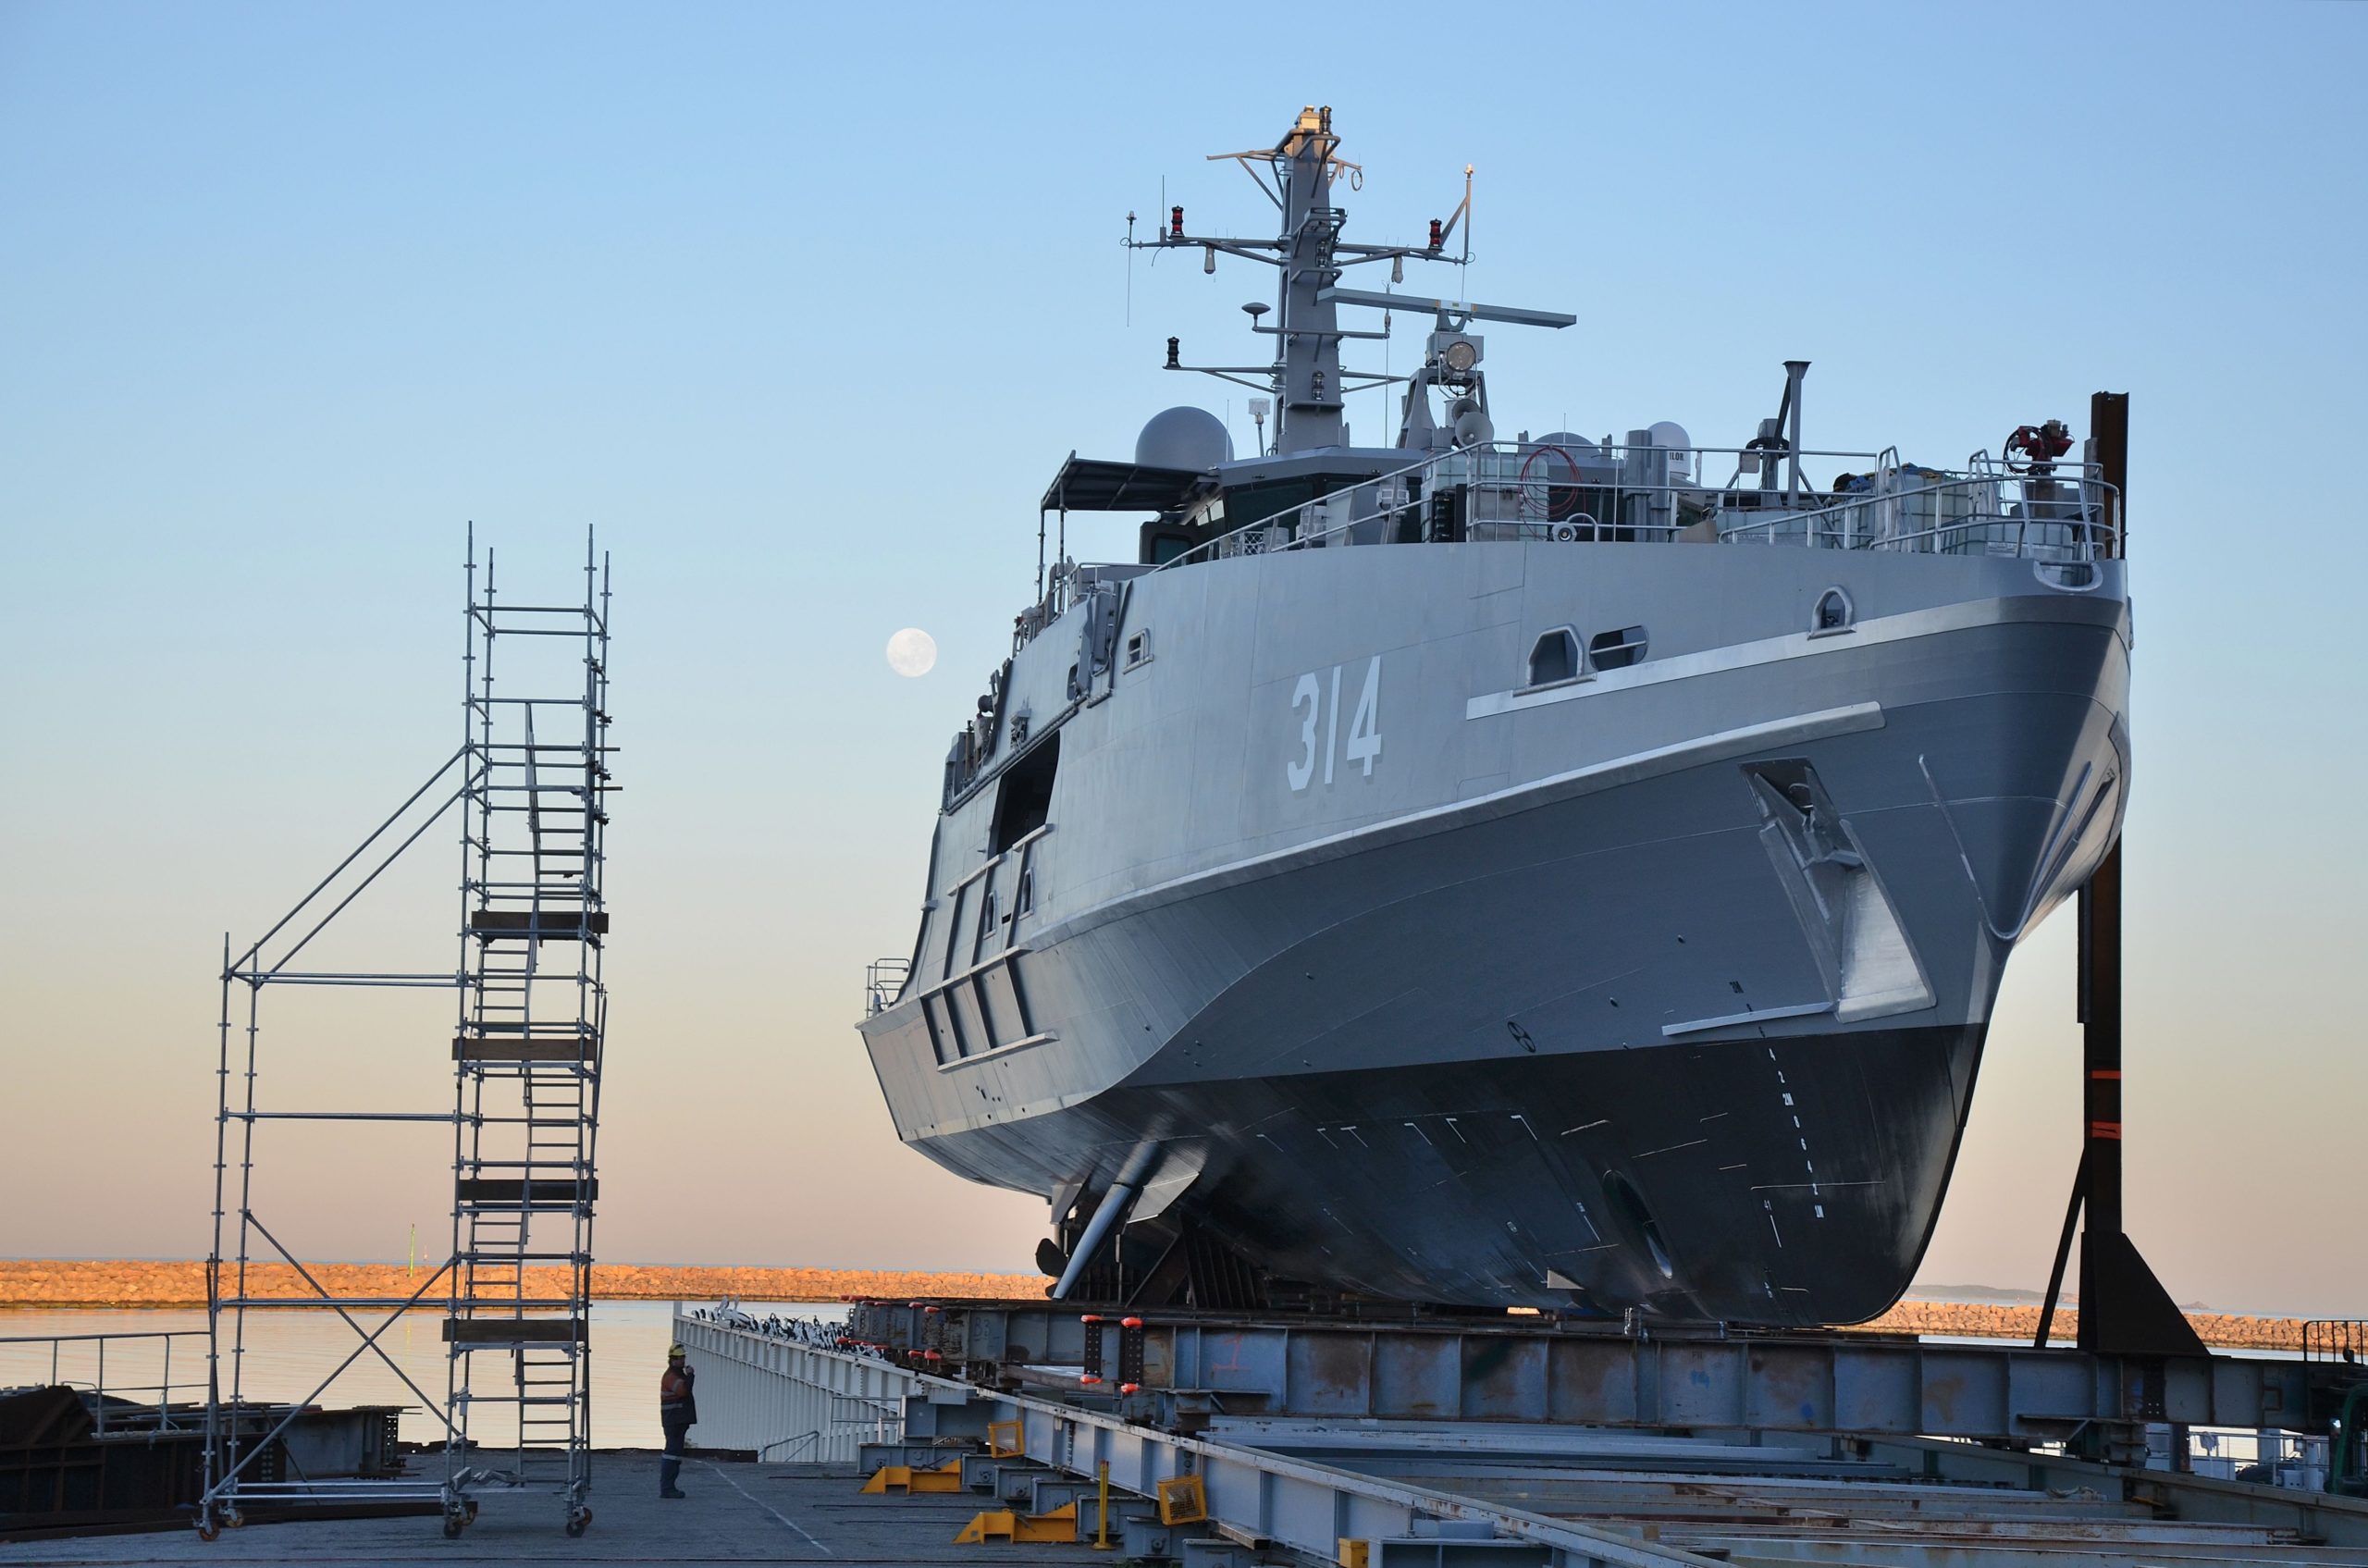 VEEM and Austal Ships continue to showcase Australia’s defence capability